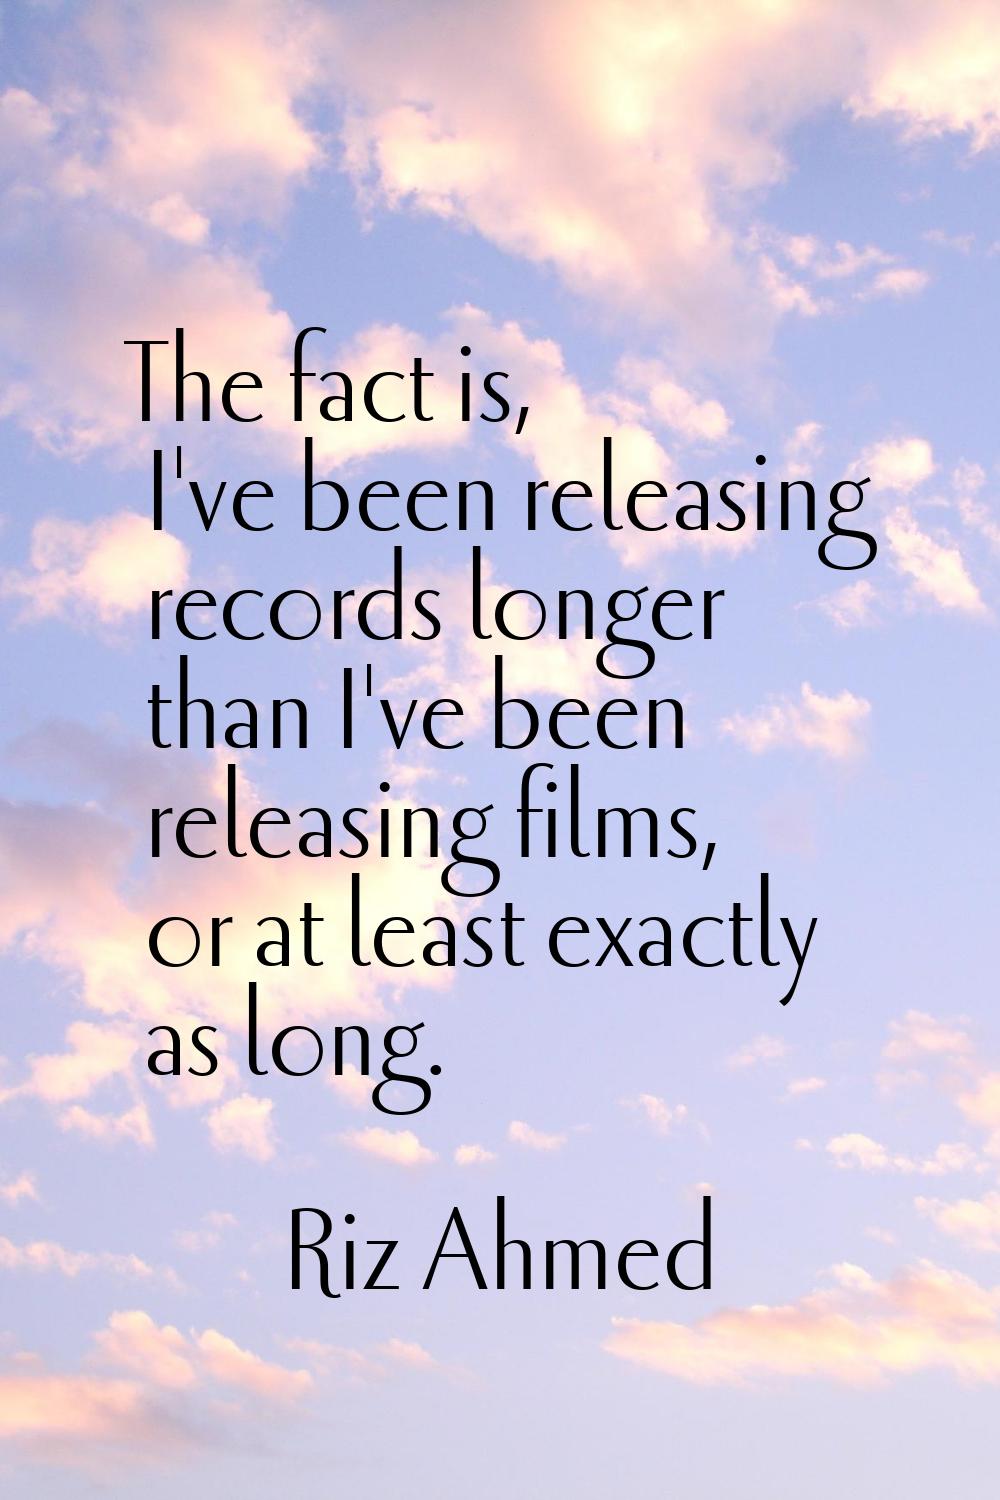 The fact is, I've been releasing records longer than I've been releasing films, or at least exactly